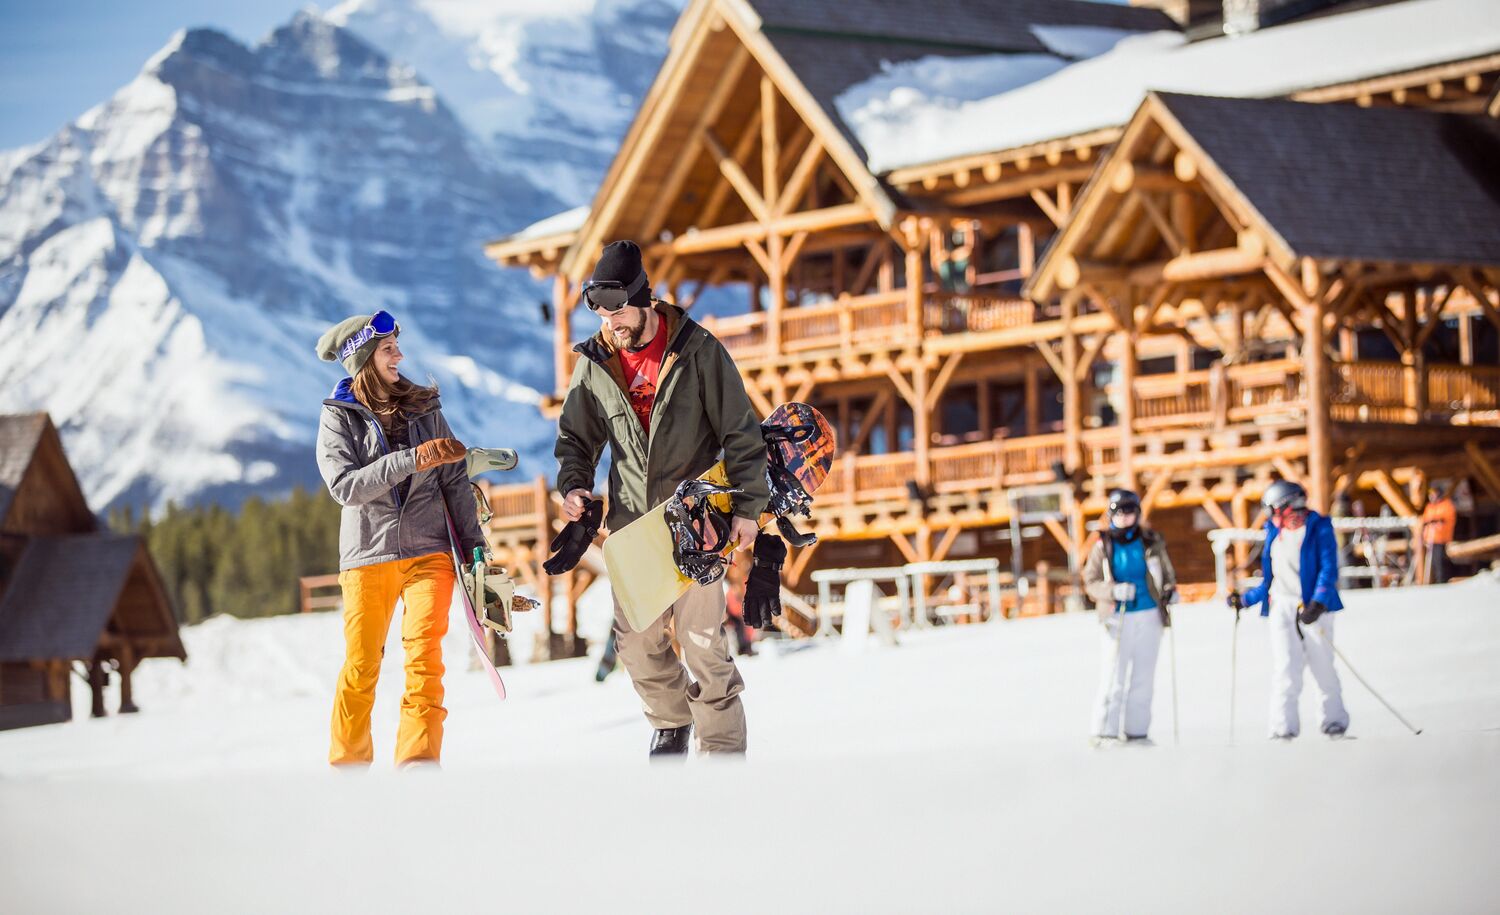 A couple walking and enjoying the cold winter day in Lake Louise Ski Resort.